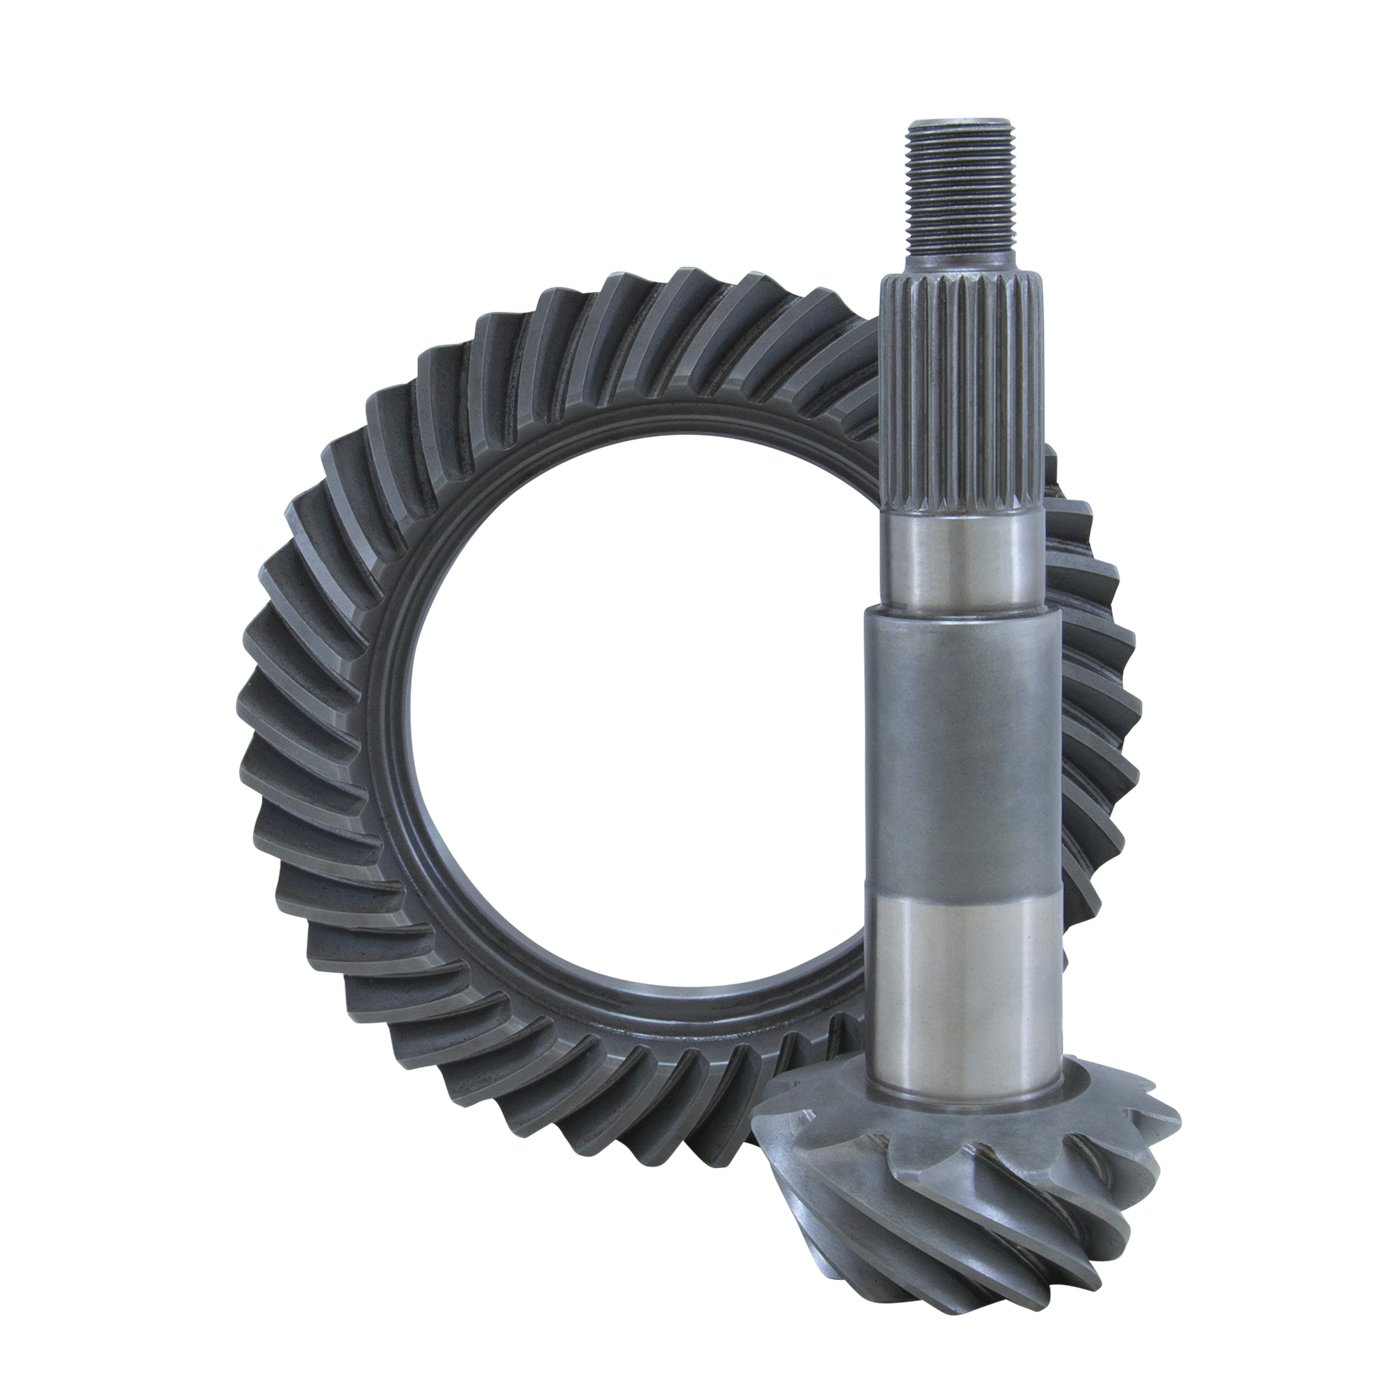 USA Standard ZG D30-373 Ring & Pinion Replacement Gear Set, For Dana 30, 3.73 Ratio